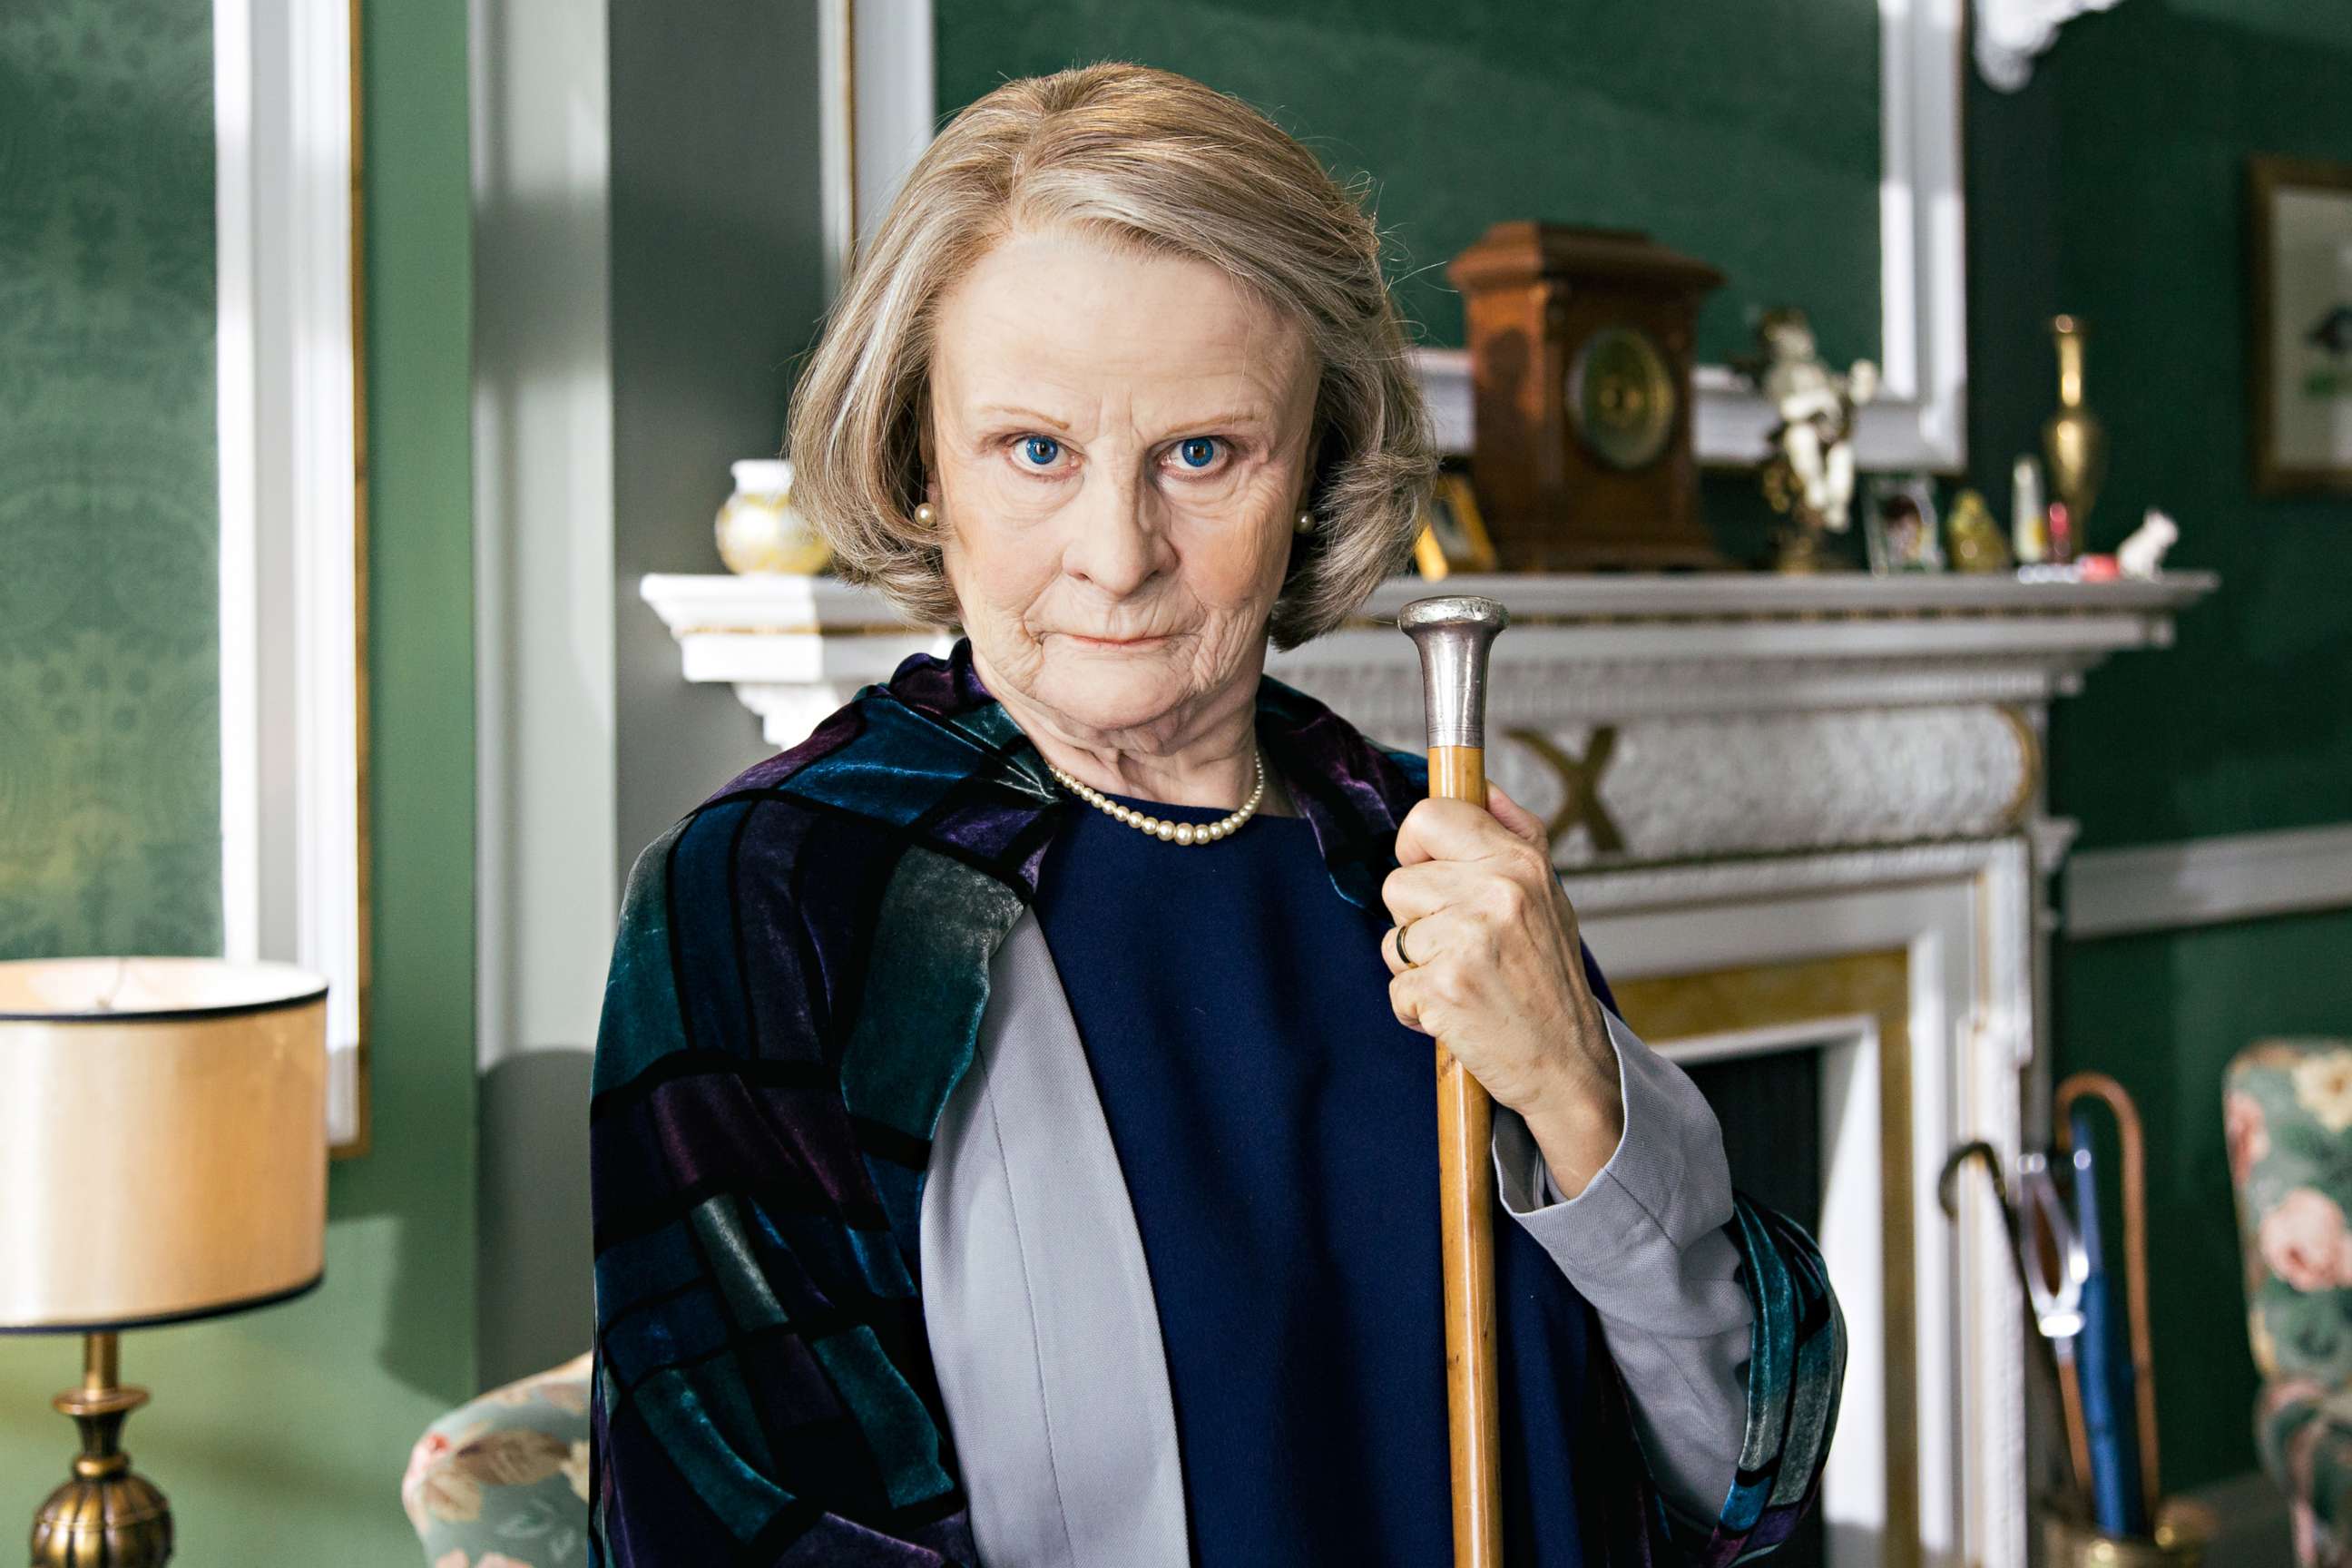 PHOTO: Tracey Ullman as Maggie Smith in HBO's "Tracey Ullman's Show."